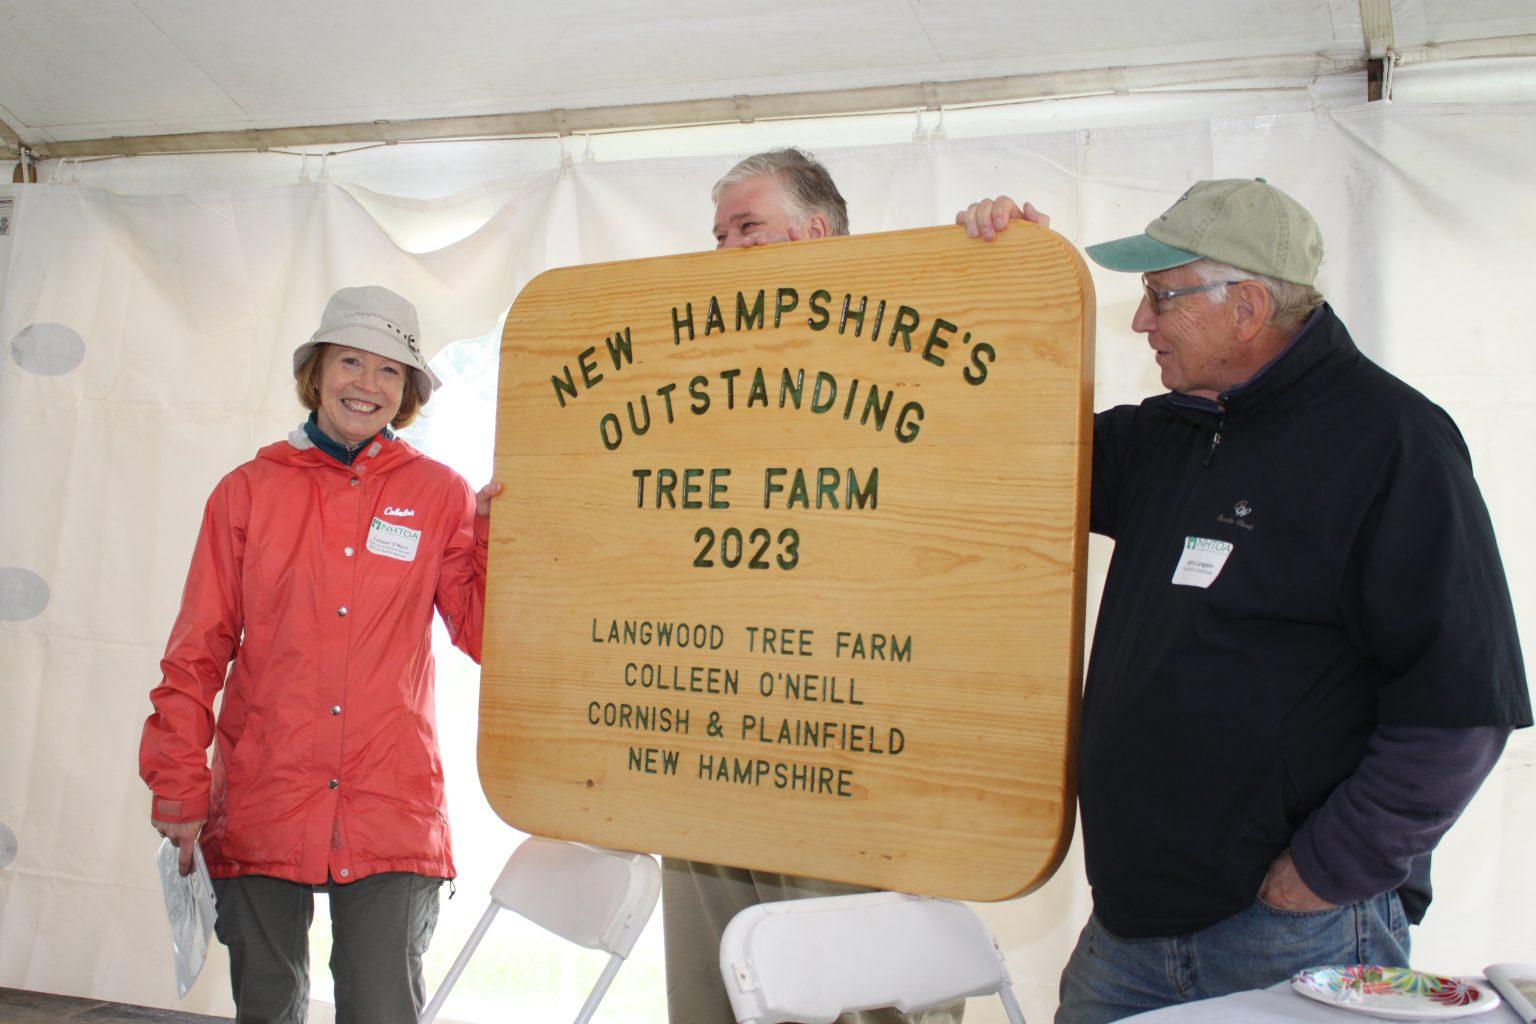 Colleen O'Neill accepts the large wooden sign at the event.